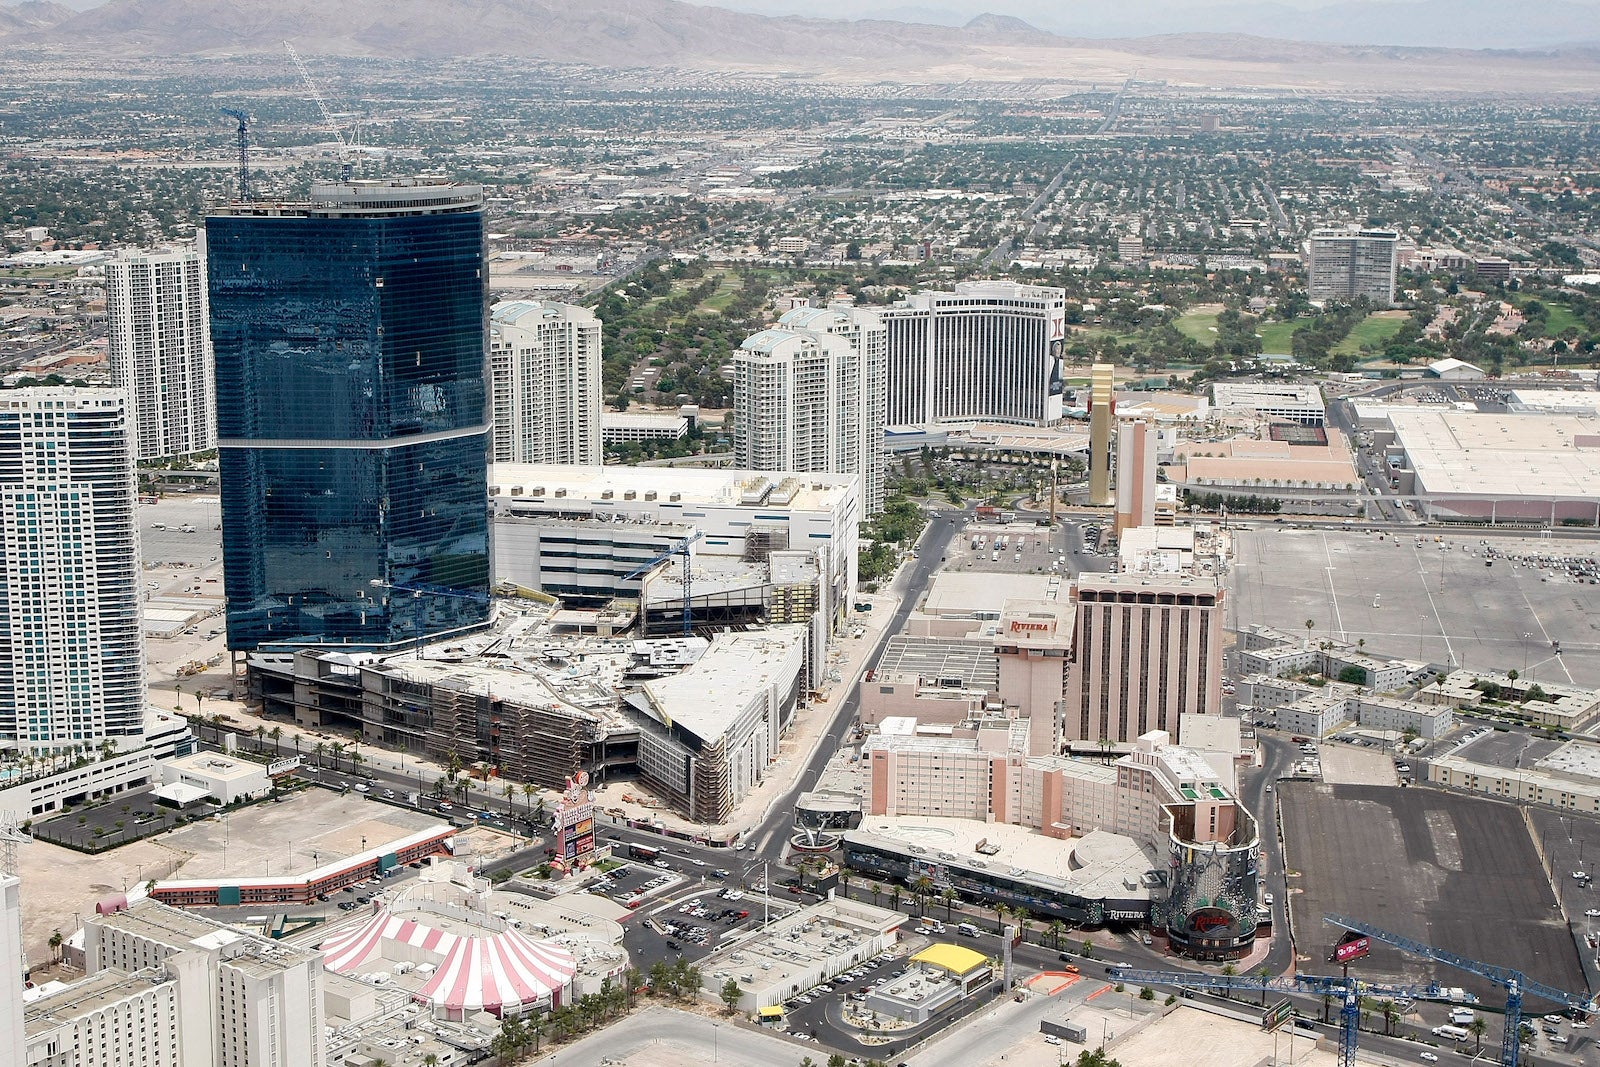 aerial view of the Fontainebleau tower in Las Vegas while under construction